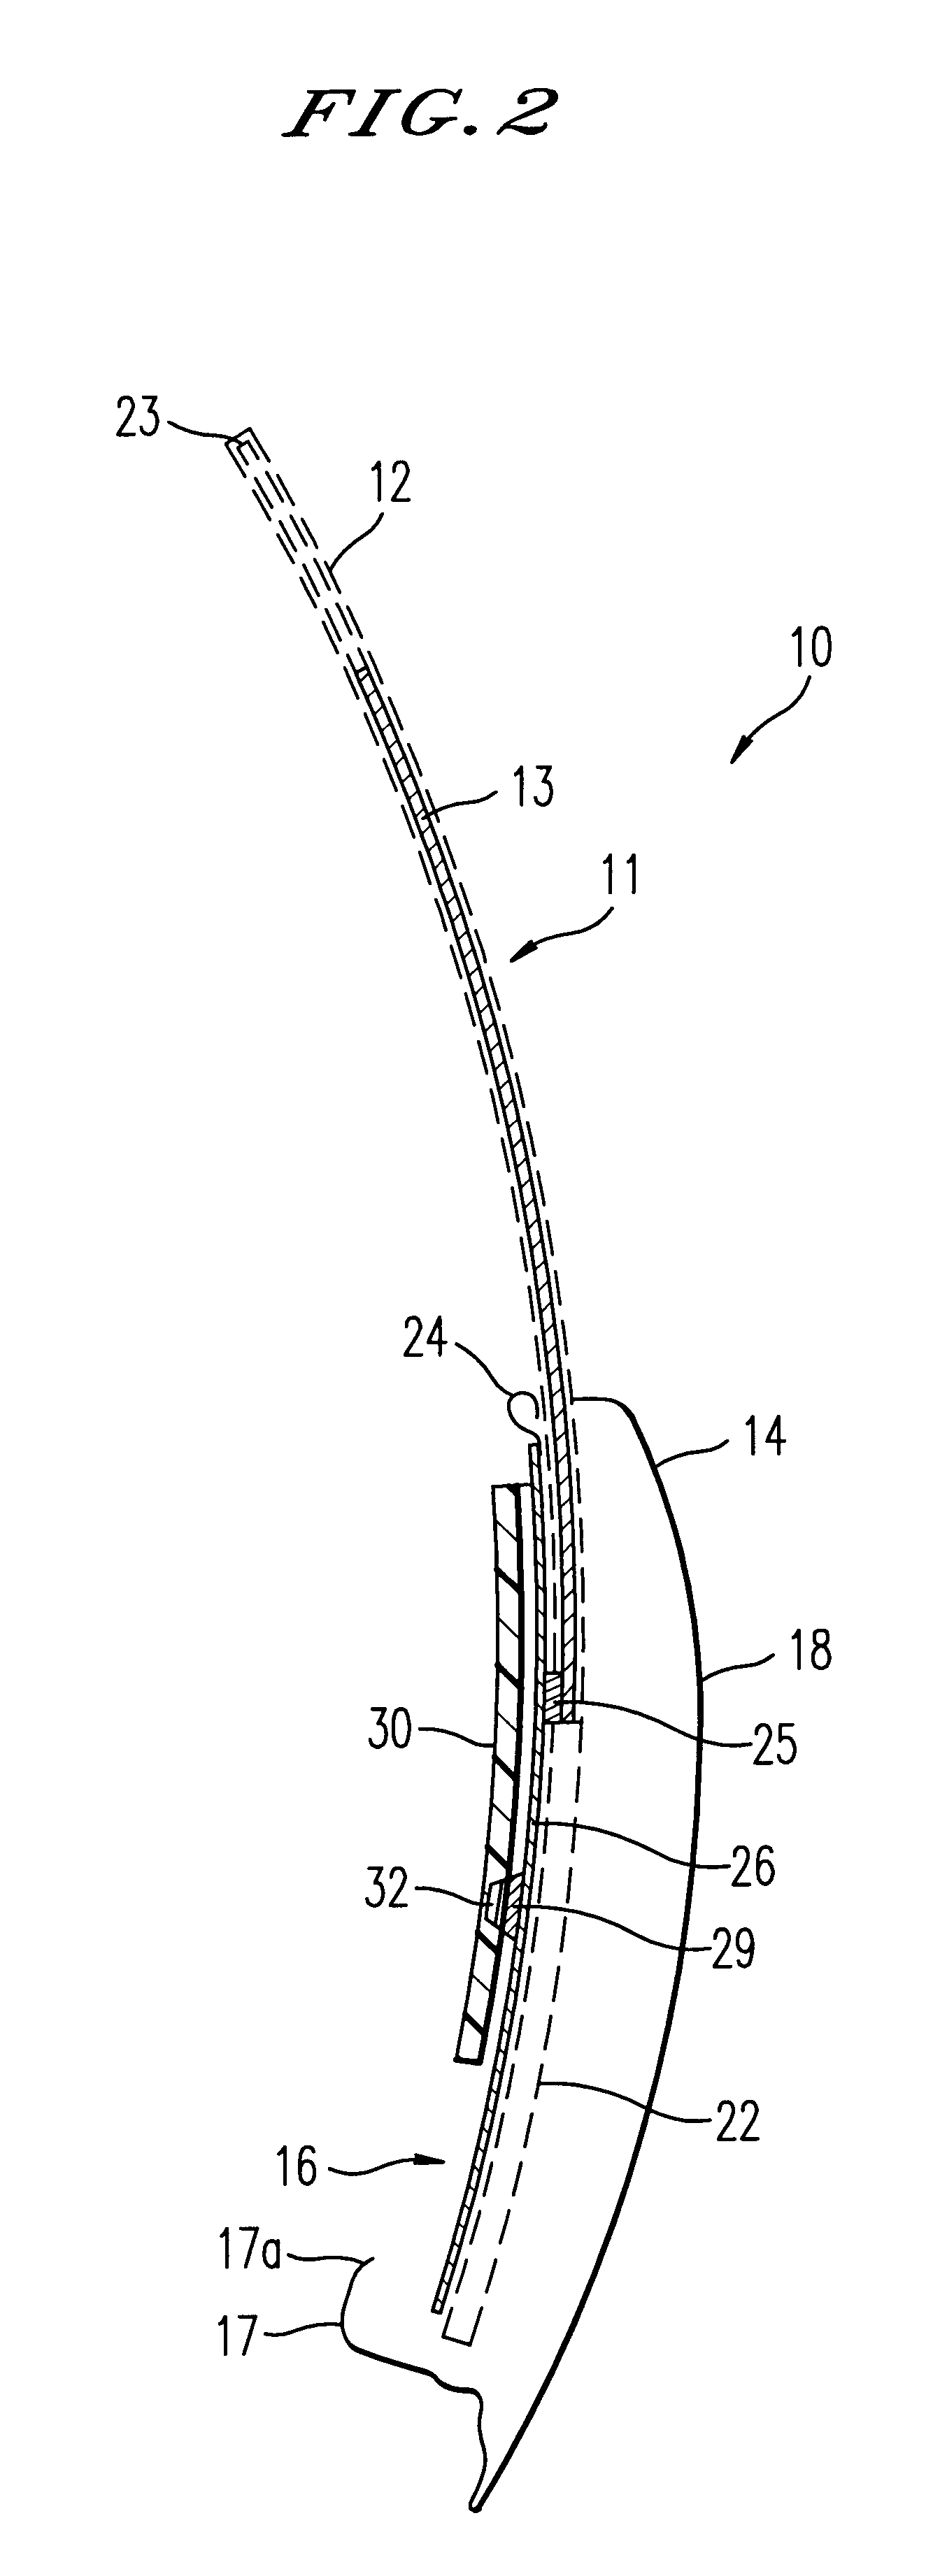 Vehicle door module including metallic elongated member incorporated within resin base plate